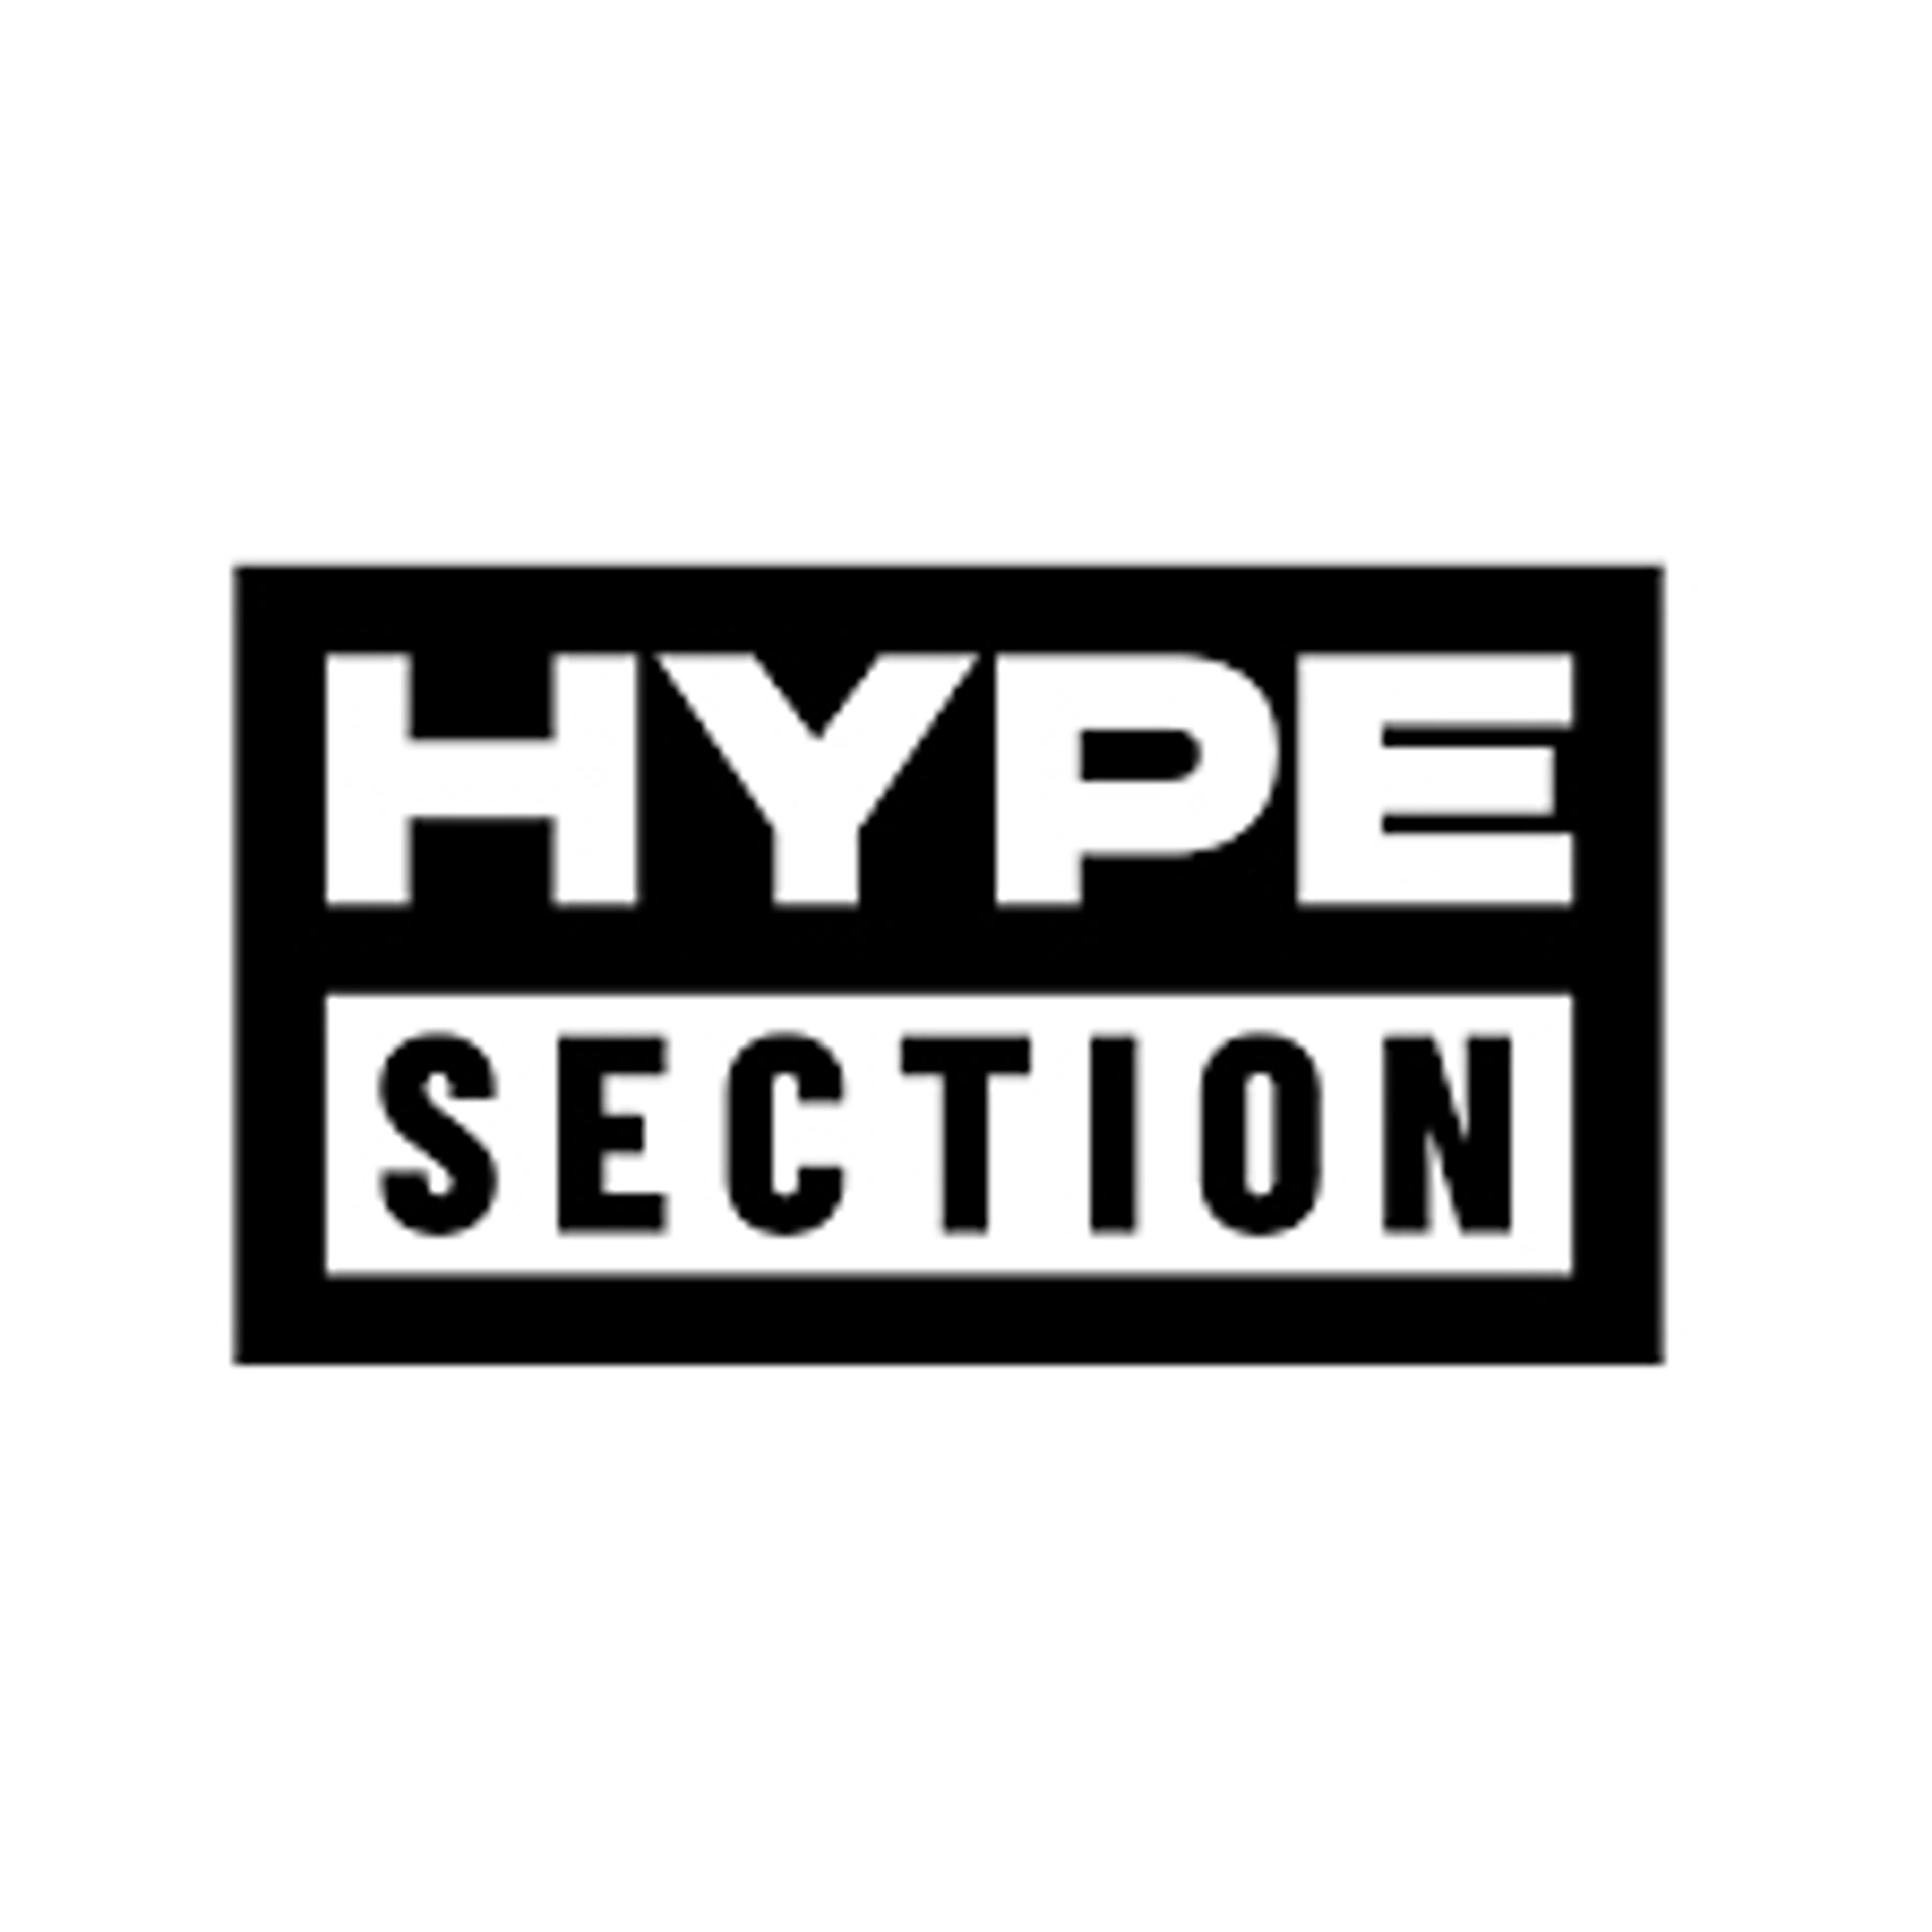 The Hype Section